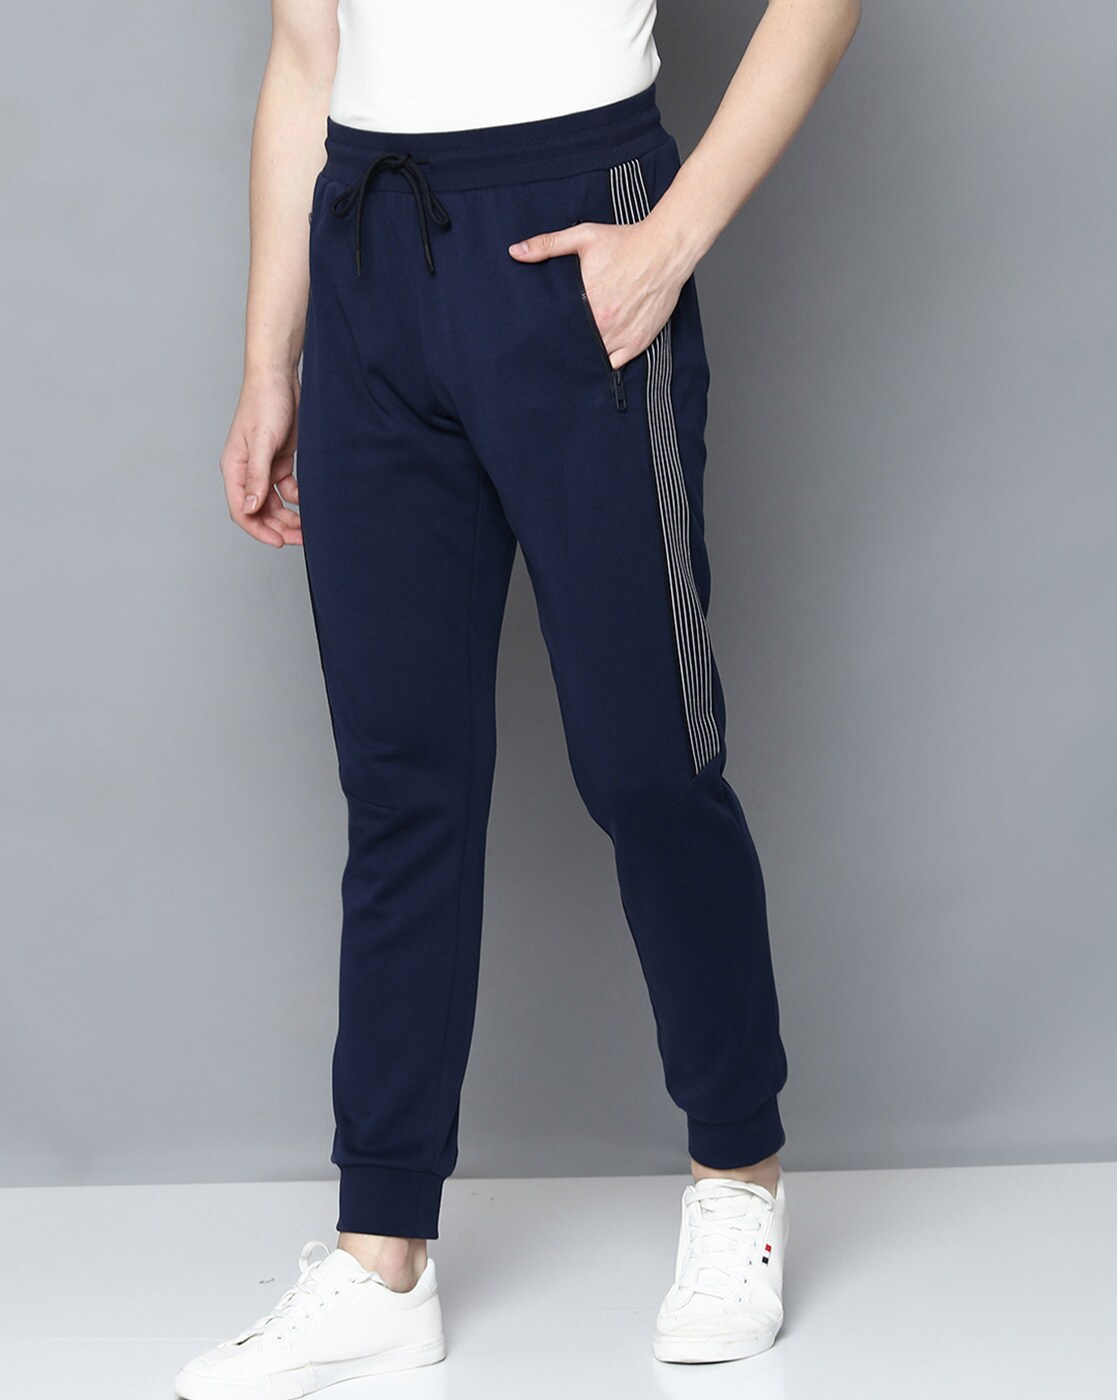 Buy Men BlueSolid Casual Track Pants Online  787988  Peter England